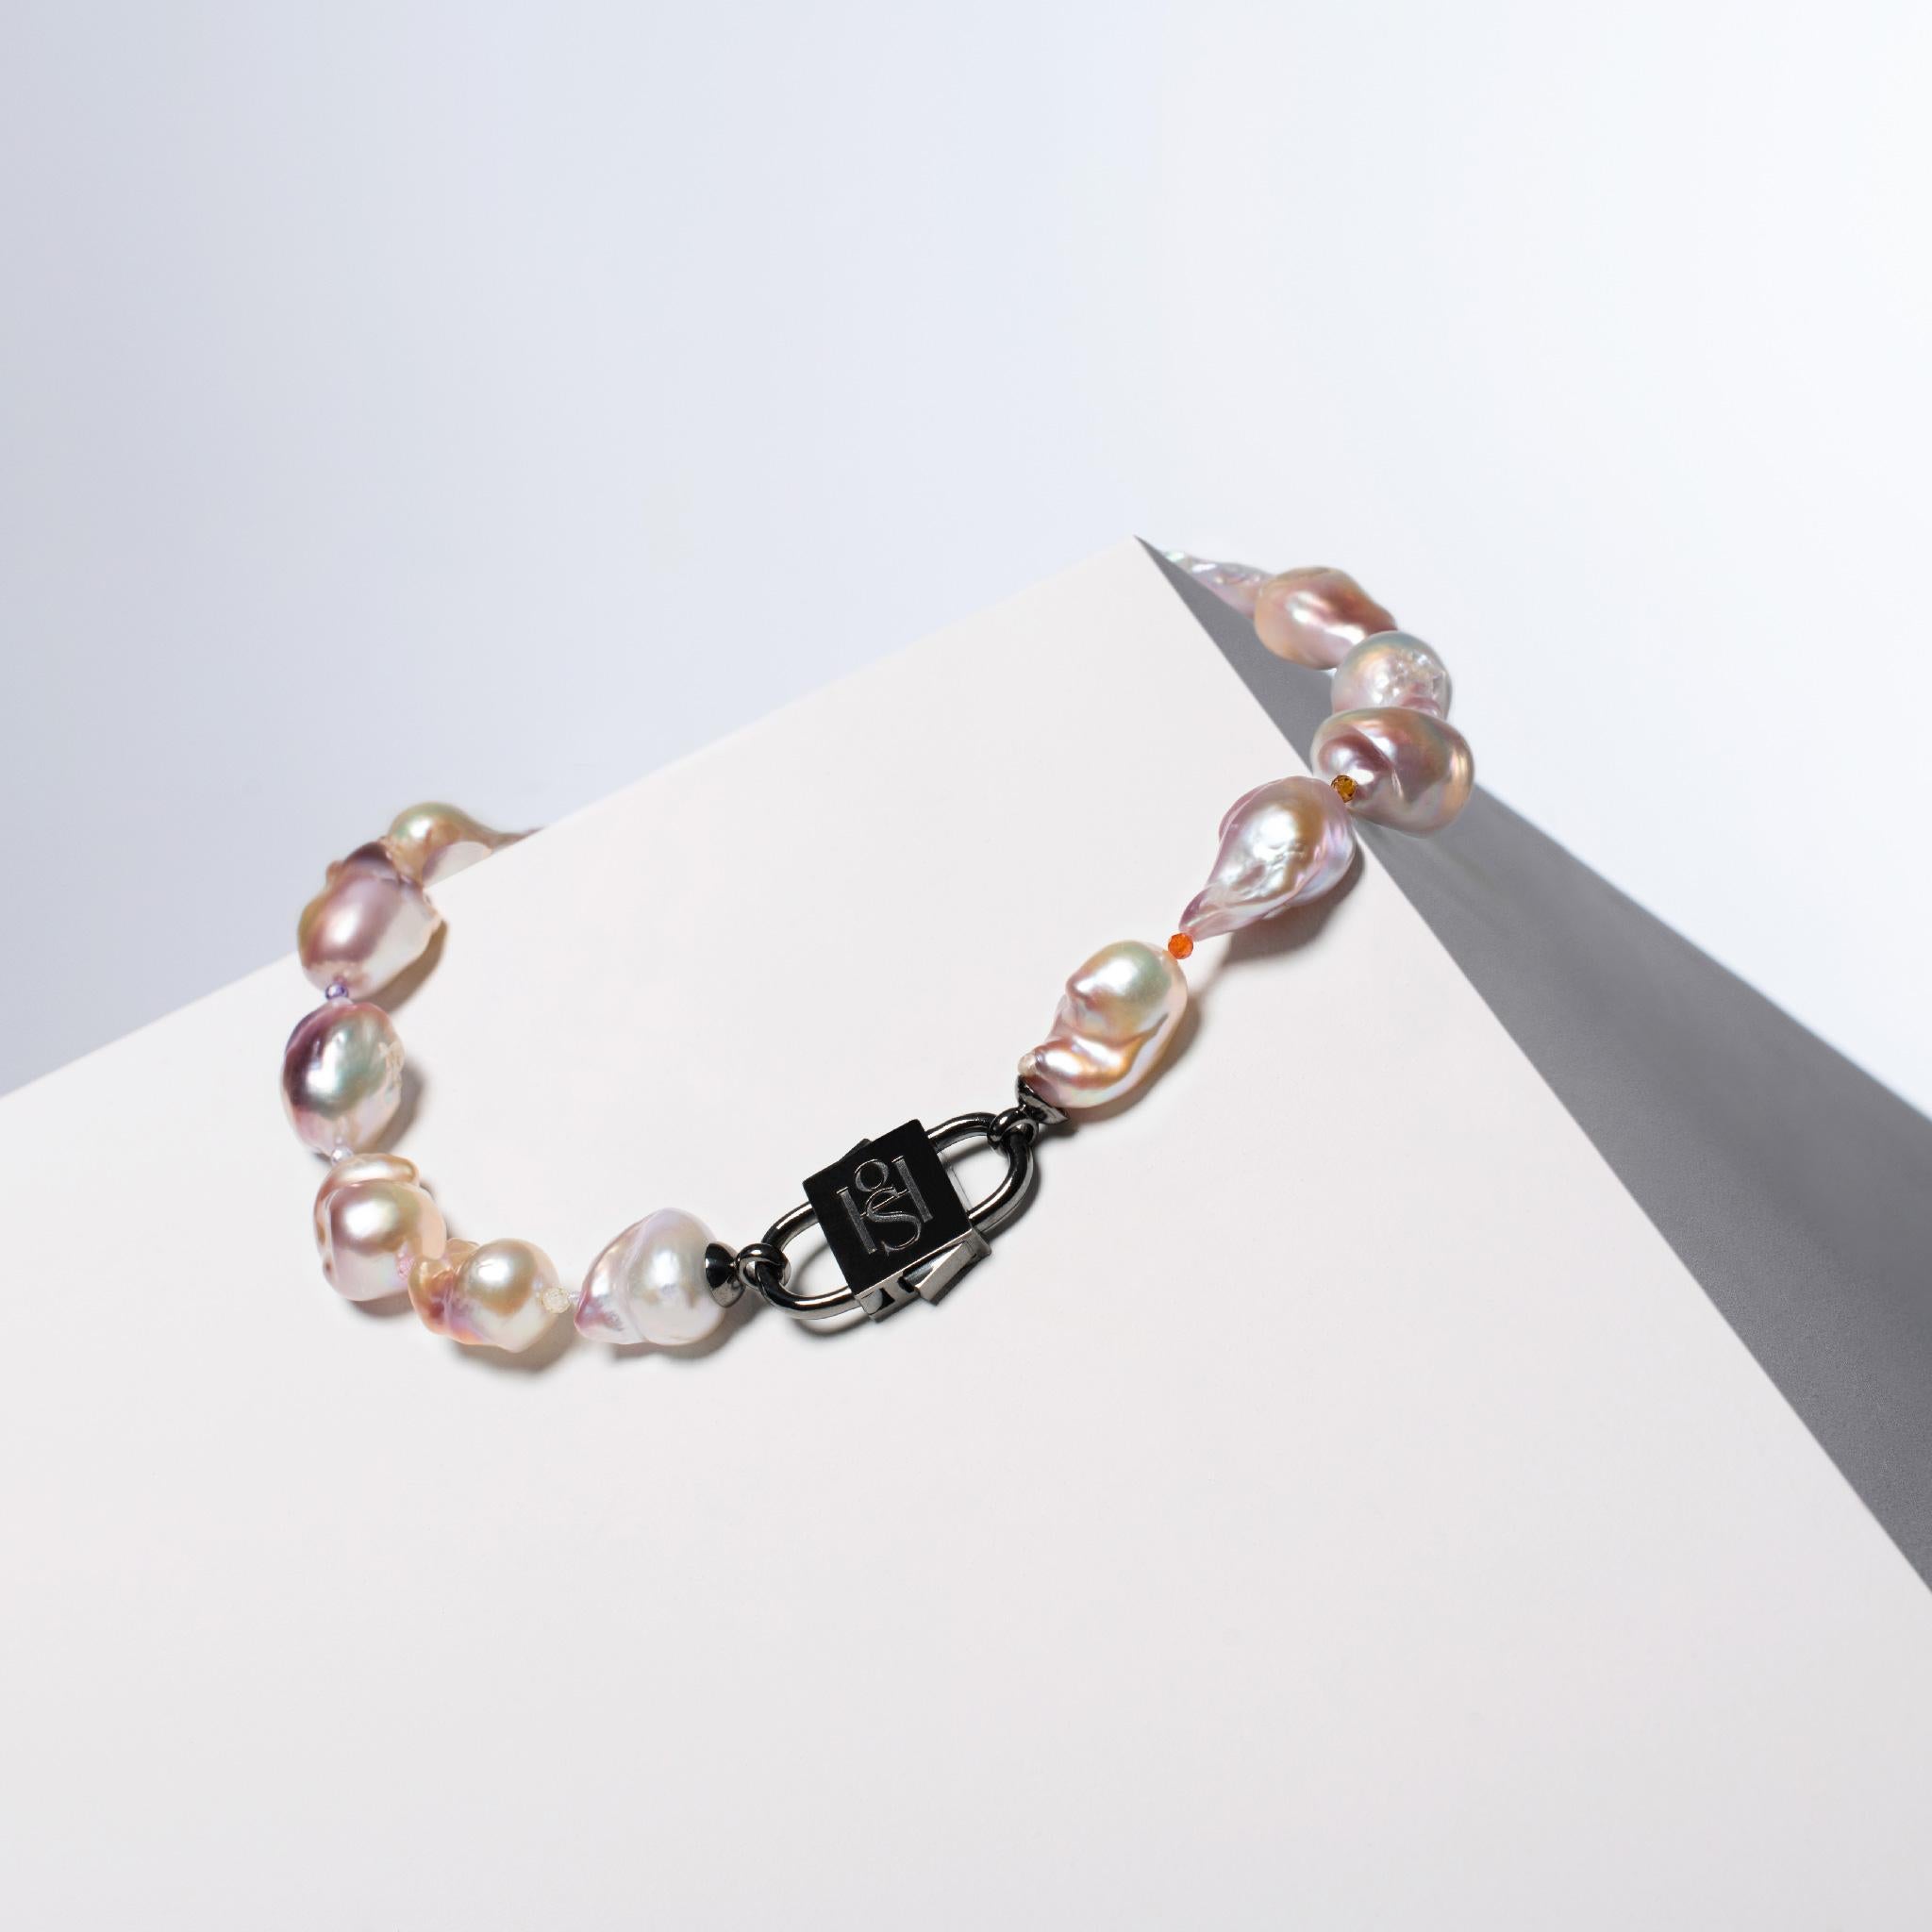 - Genuine, rare find pink baroque pearls interspersed with ornaments of colorful precious semi-gemstones for a unique and elegant aesthetic
- Pearl row is 42 cm (16.5 inches) and the HoS Lock™ measuring 3.5 cm (1.3 inches) that is is rhodium filled